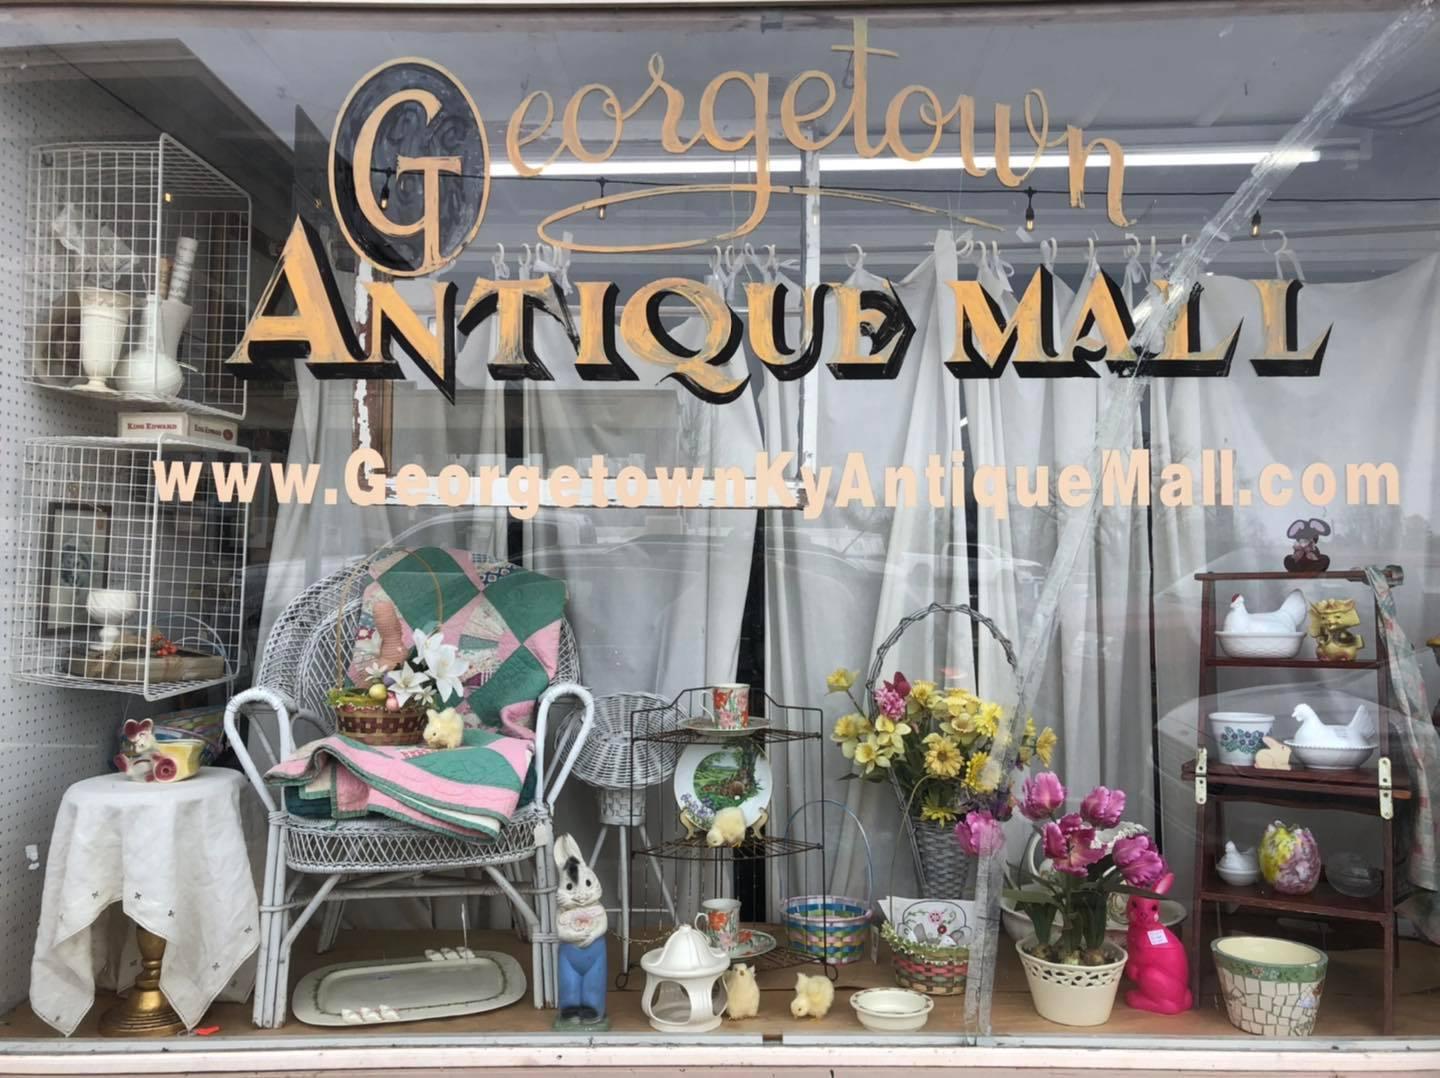 Pet Friendly Georgetown Antique Mall